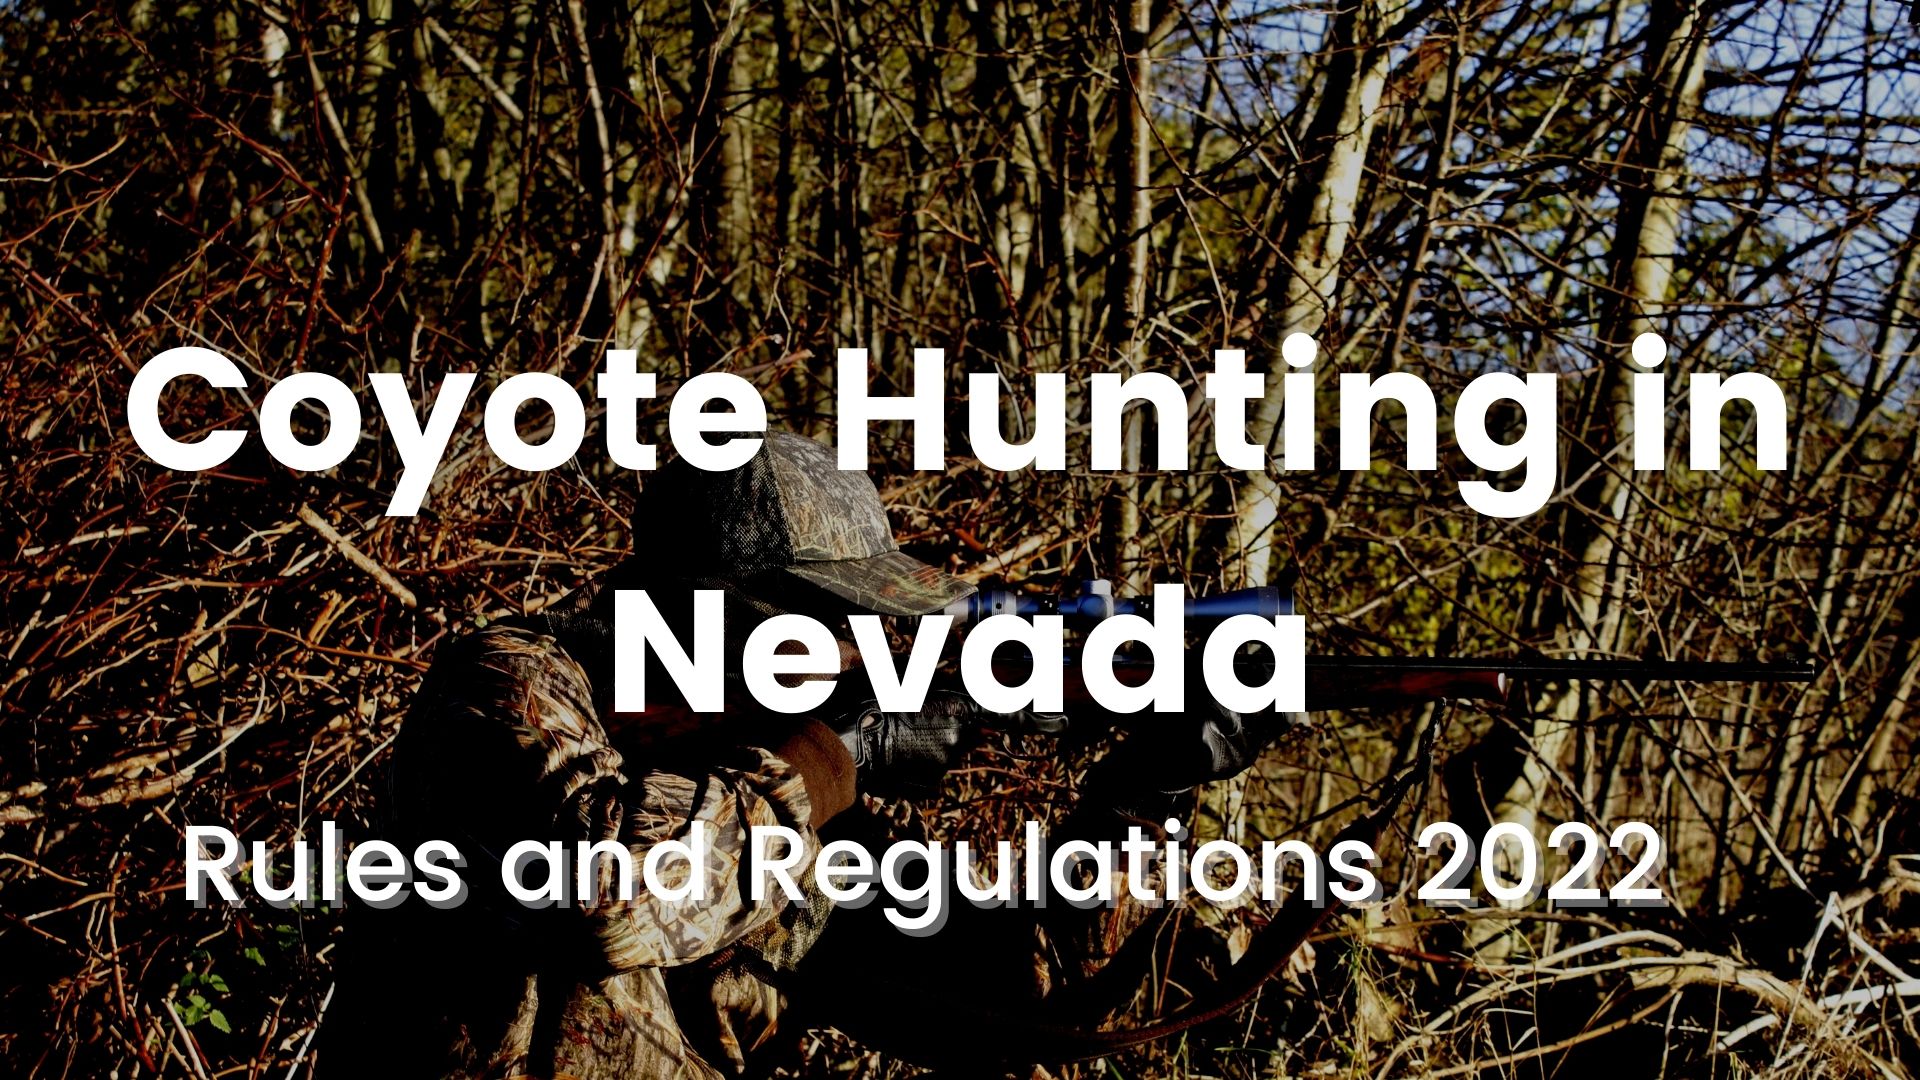 Coyote Hunting in Nevada